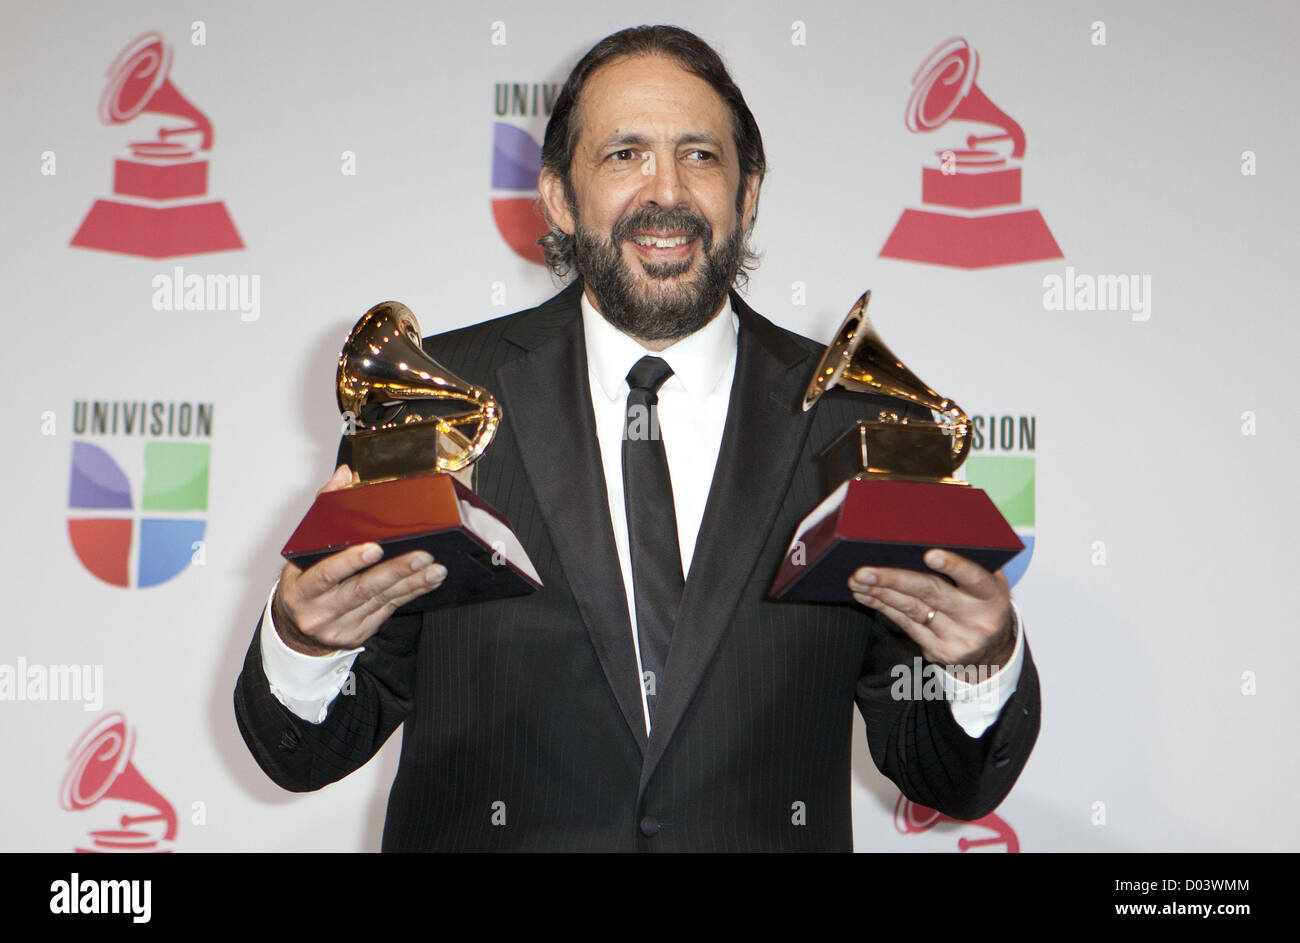 Nov. 15, 2012 - Las Vegas, Nevada, USA - Singer/producer Juan Luis Guerra poses with the awards for Producer of the Year and Album of the Year in the press room during the 2012 Latin Grammy Awards held  at Mandalay Bay in Las Vegas, Nevada on Thursday, November 15, 2012. (Credit Image: © Javier Rojas/Prensa Internacional/ZUMAPRESS.com) Stock Photo